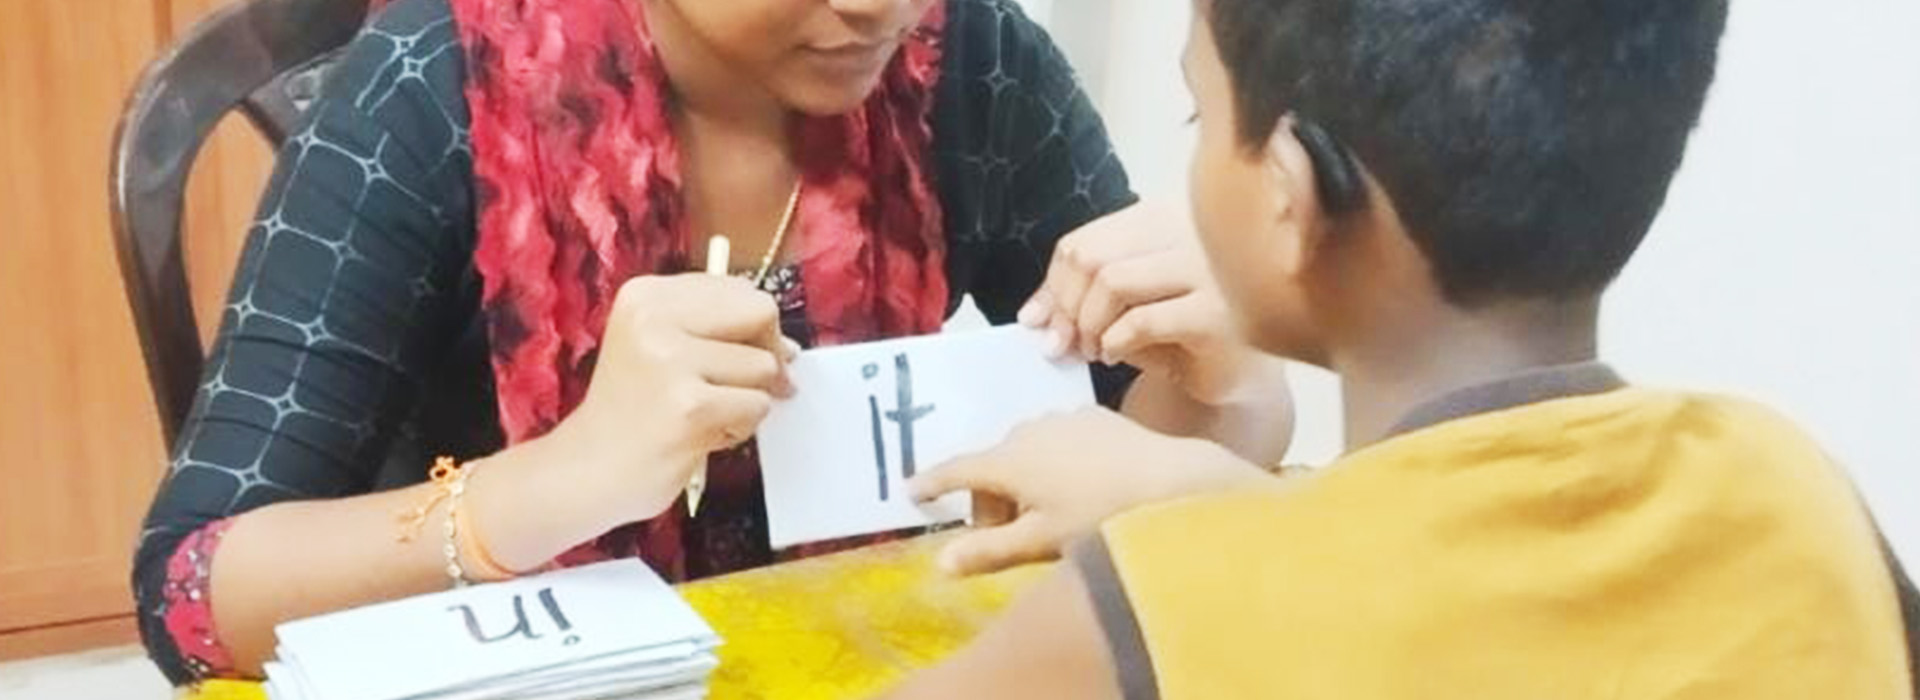 A speech therapist assisting a child in reading words by holding up a placard.